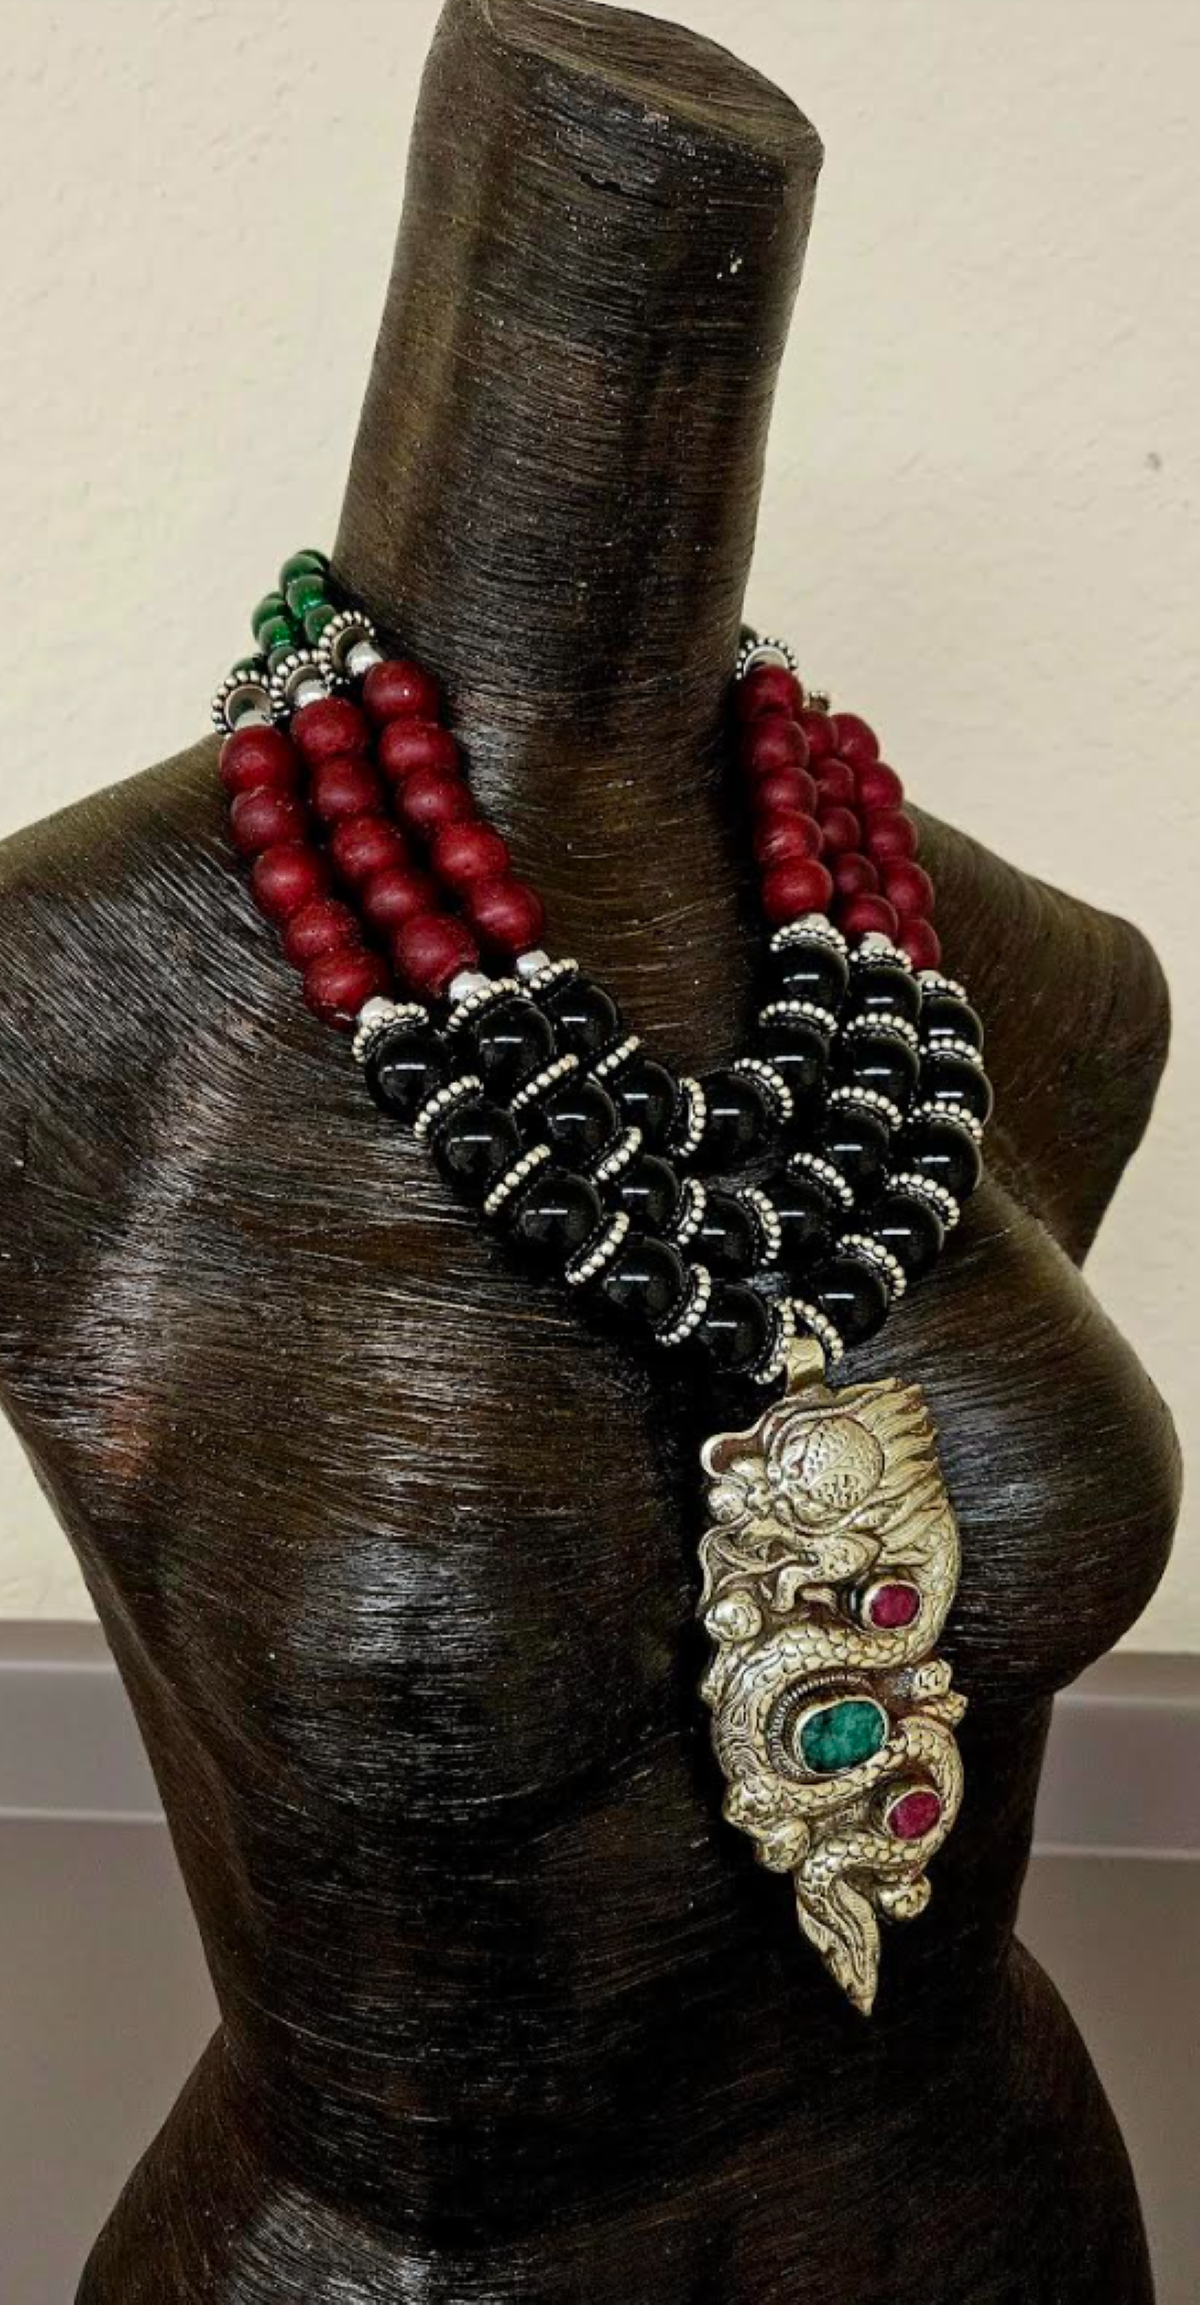 Ornate Tibetan Dragon Pendant on Multi Strand Onyx & Glass Bib Necklace, Red Green Black and Silver Beaded Chest Piece, Haute Couture Jewelry for Photoshoots